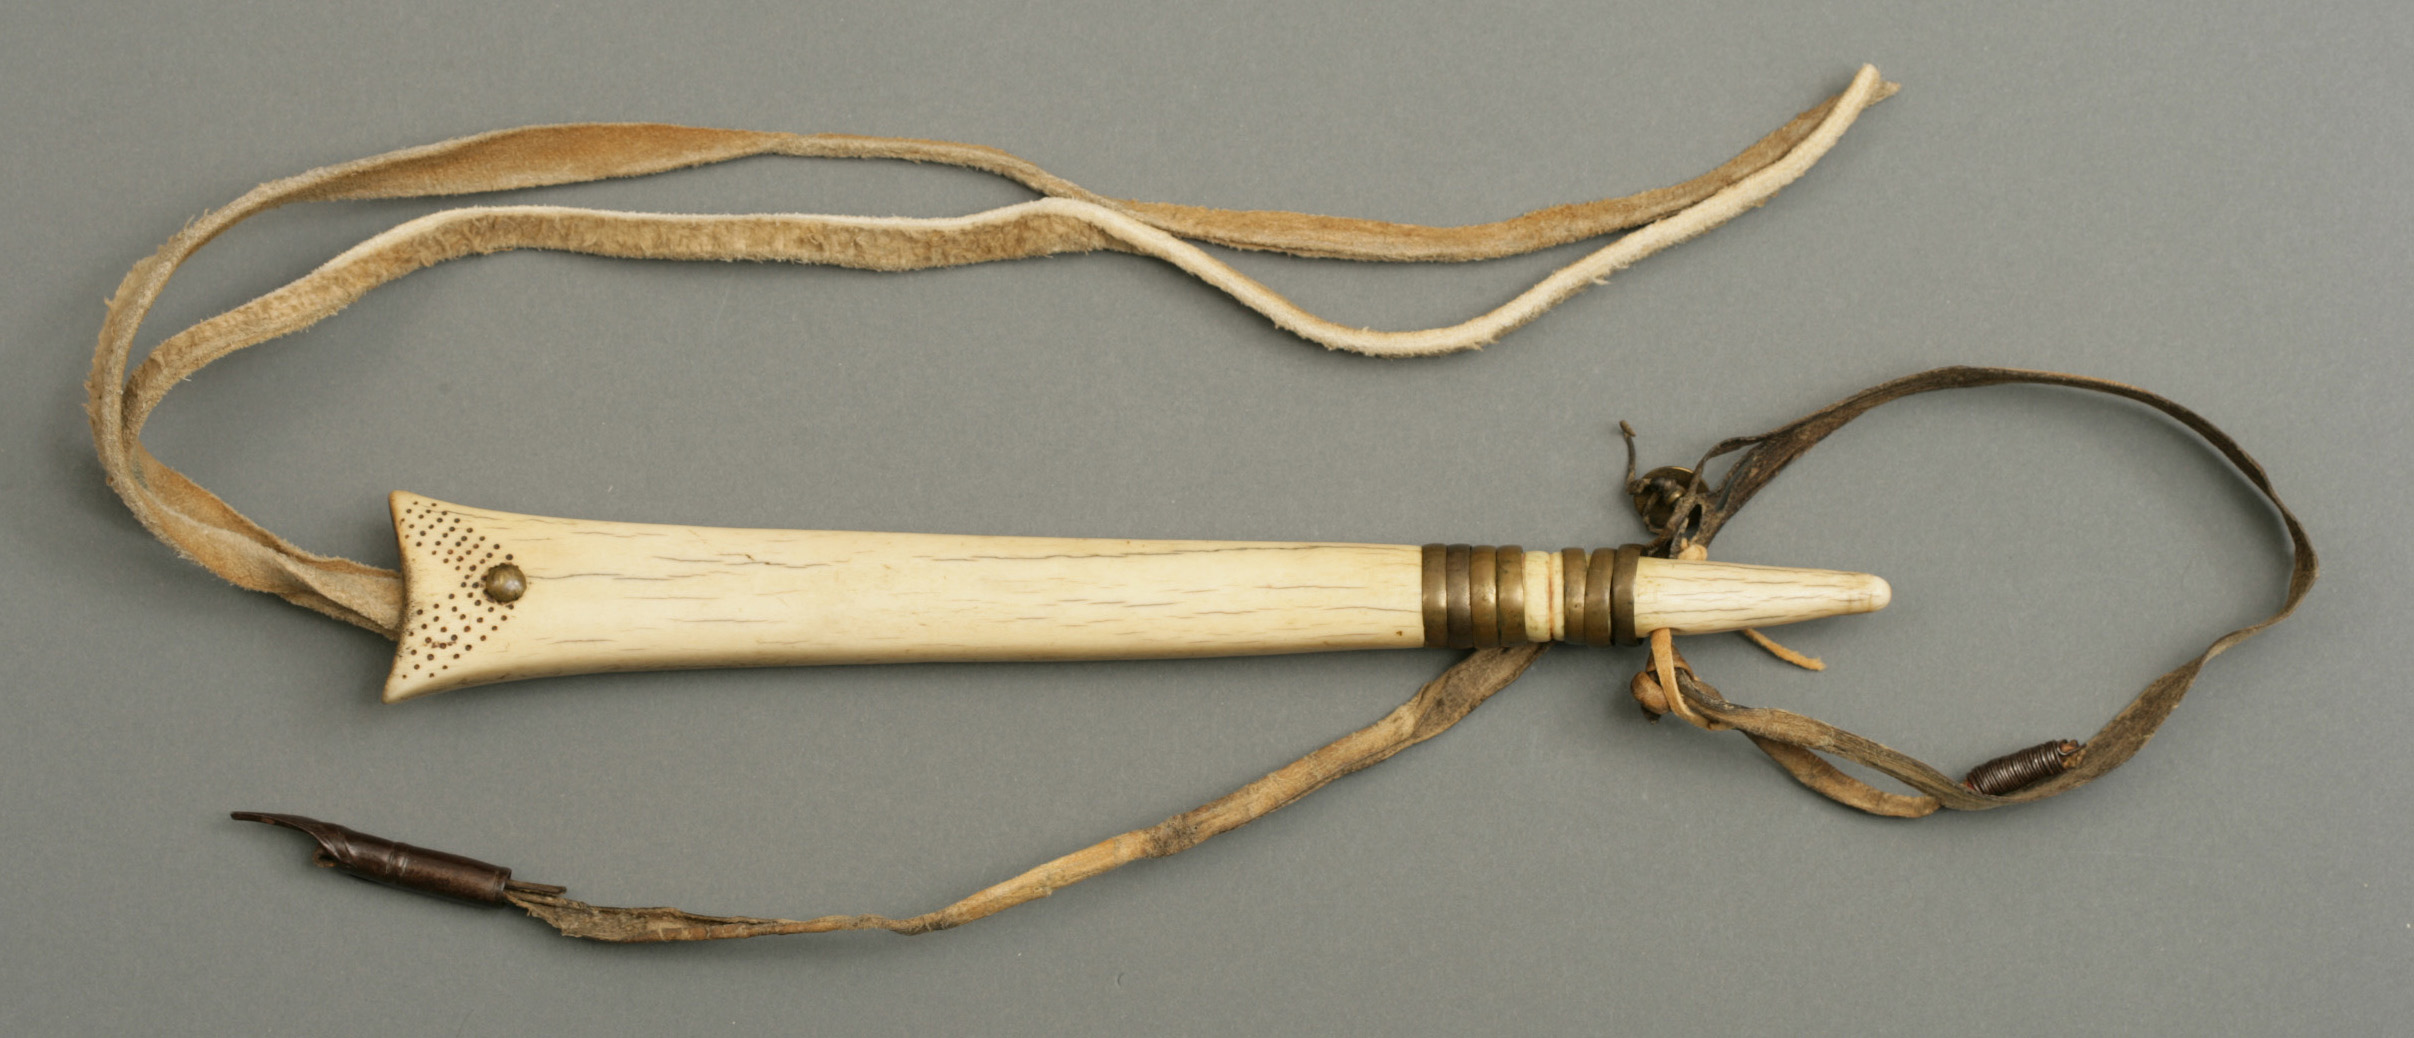 Decorated elk antler horse quirt or whip. The handle is formed of a piece of rawhide thong to which a forged iron ram rod is attached at one end. 